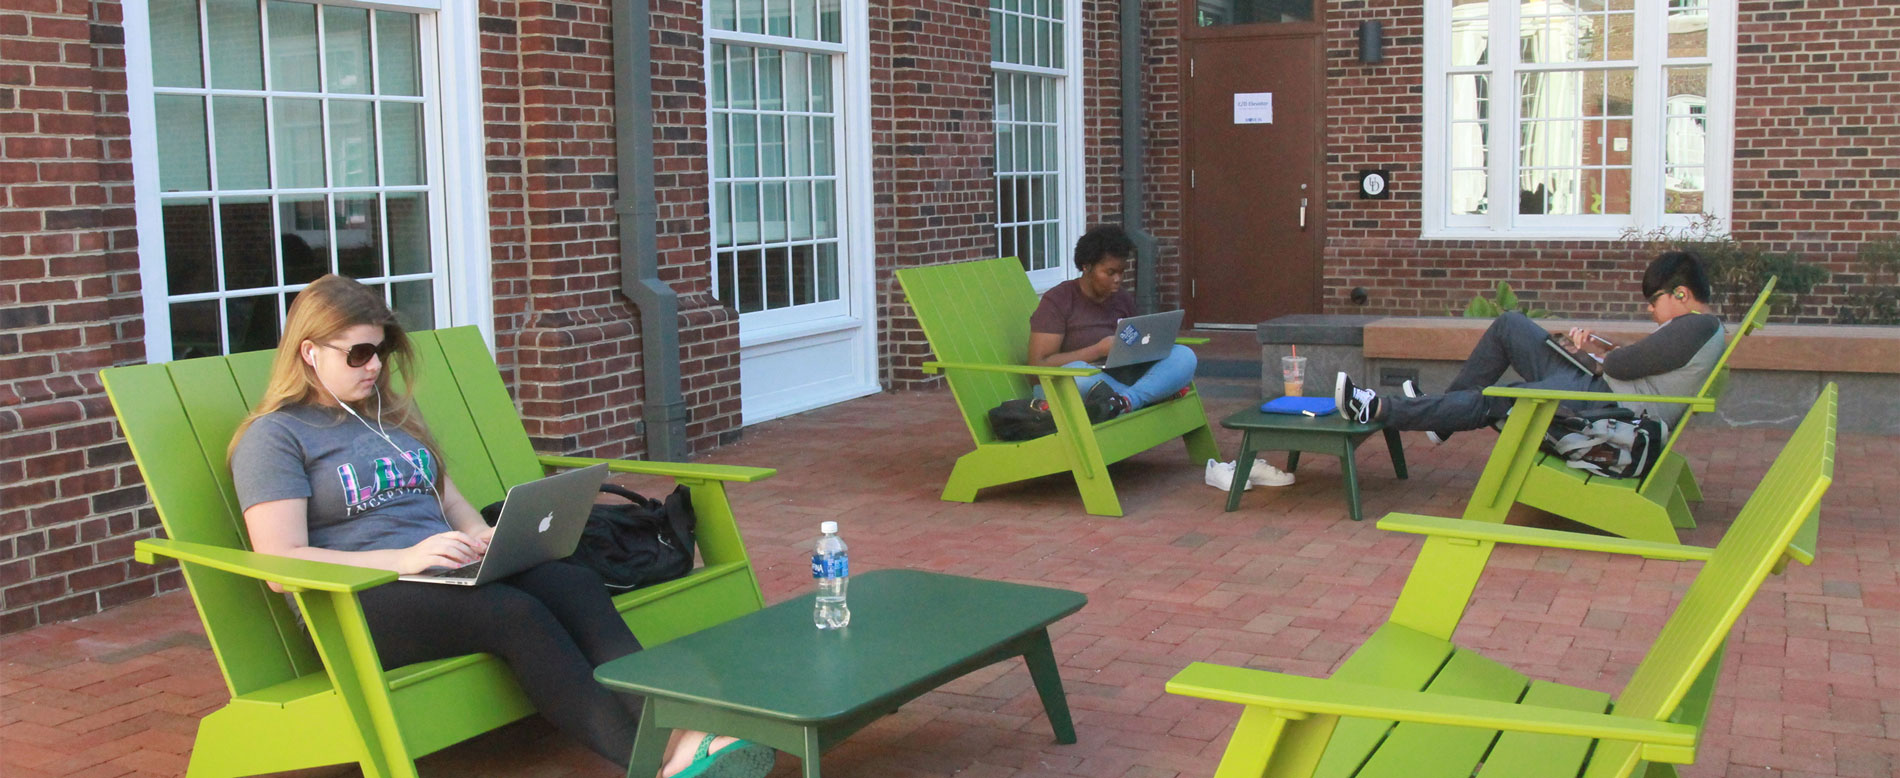 Students working in outdoor space with bright green adirondacks